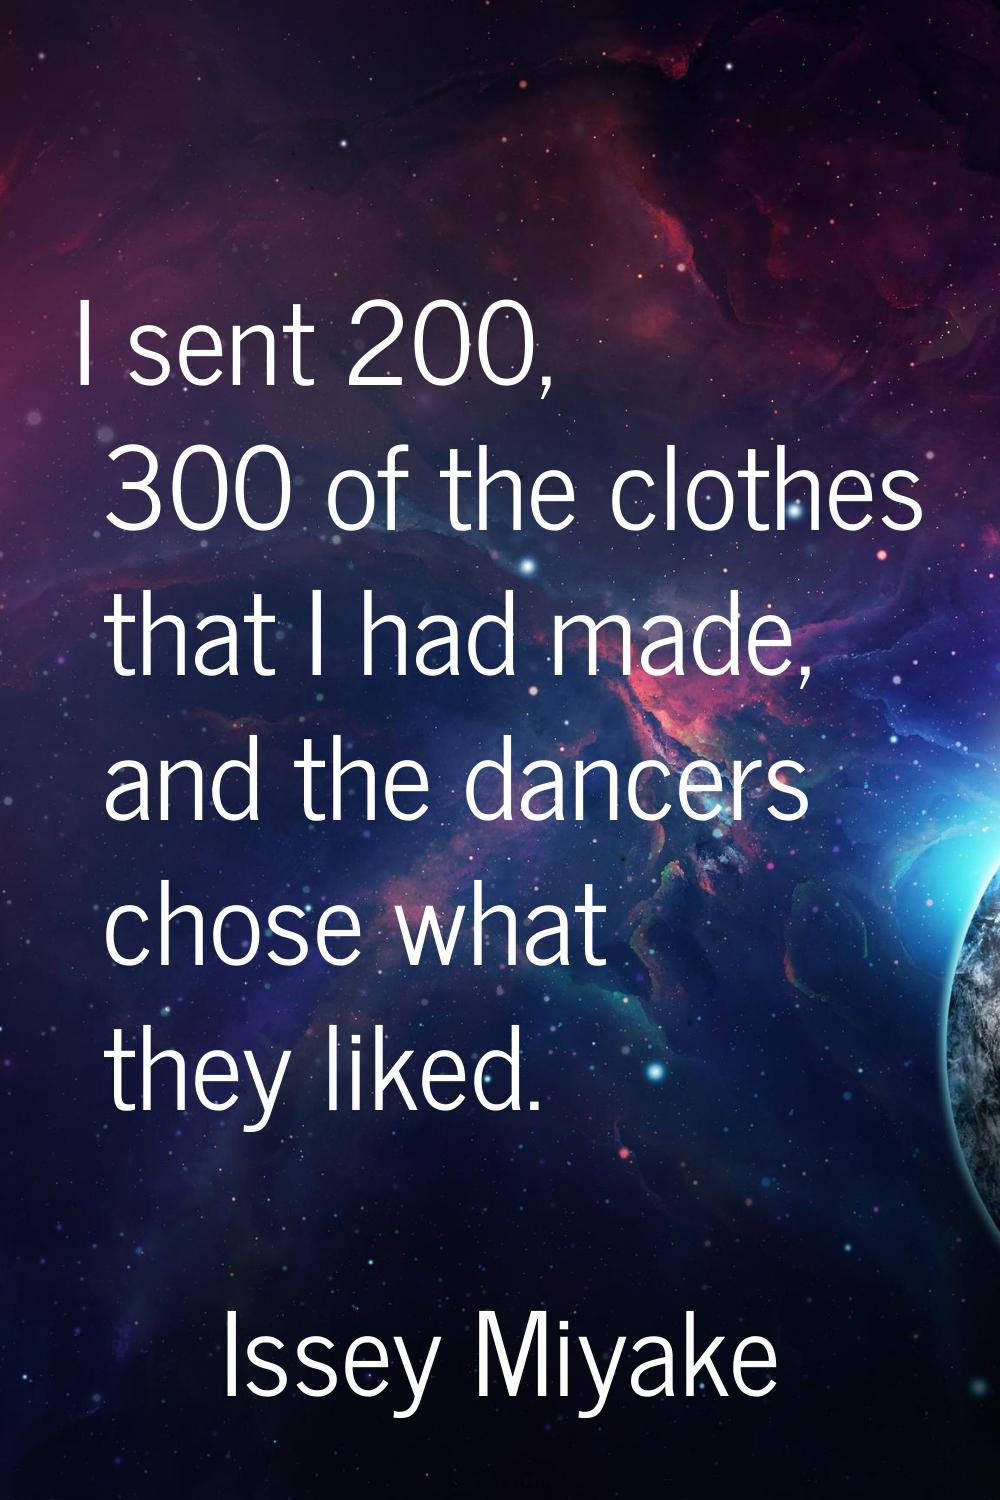 I sent 200, 300 of the clothes that I had made, and the dancers chose what they liked.